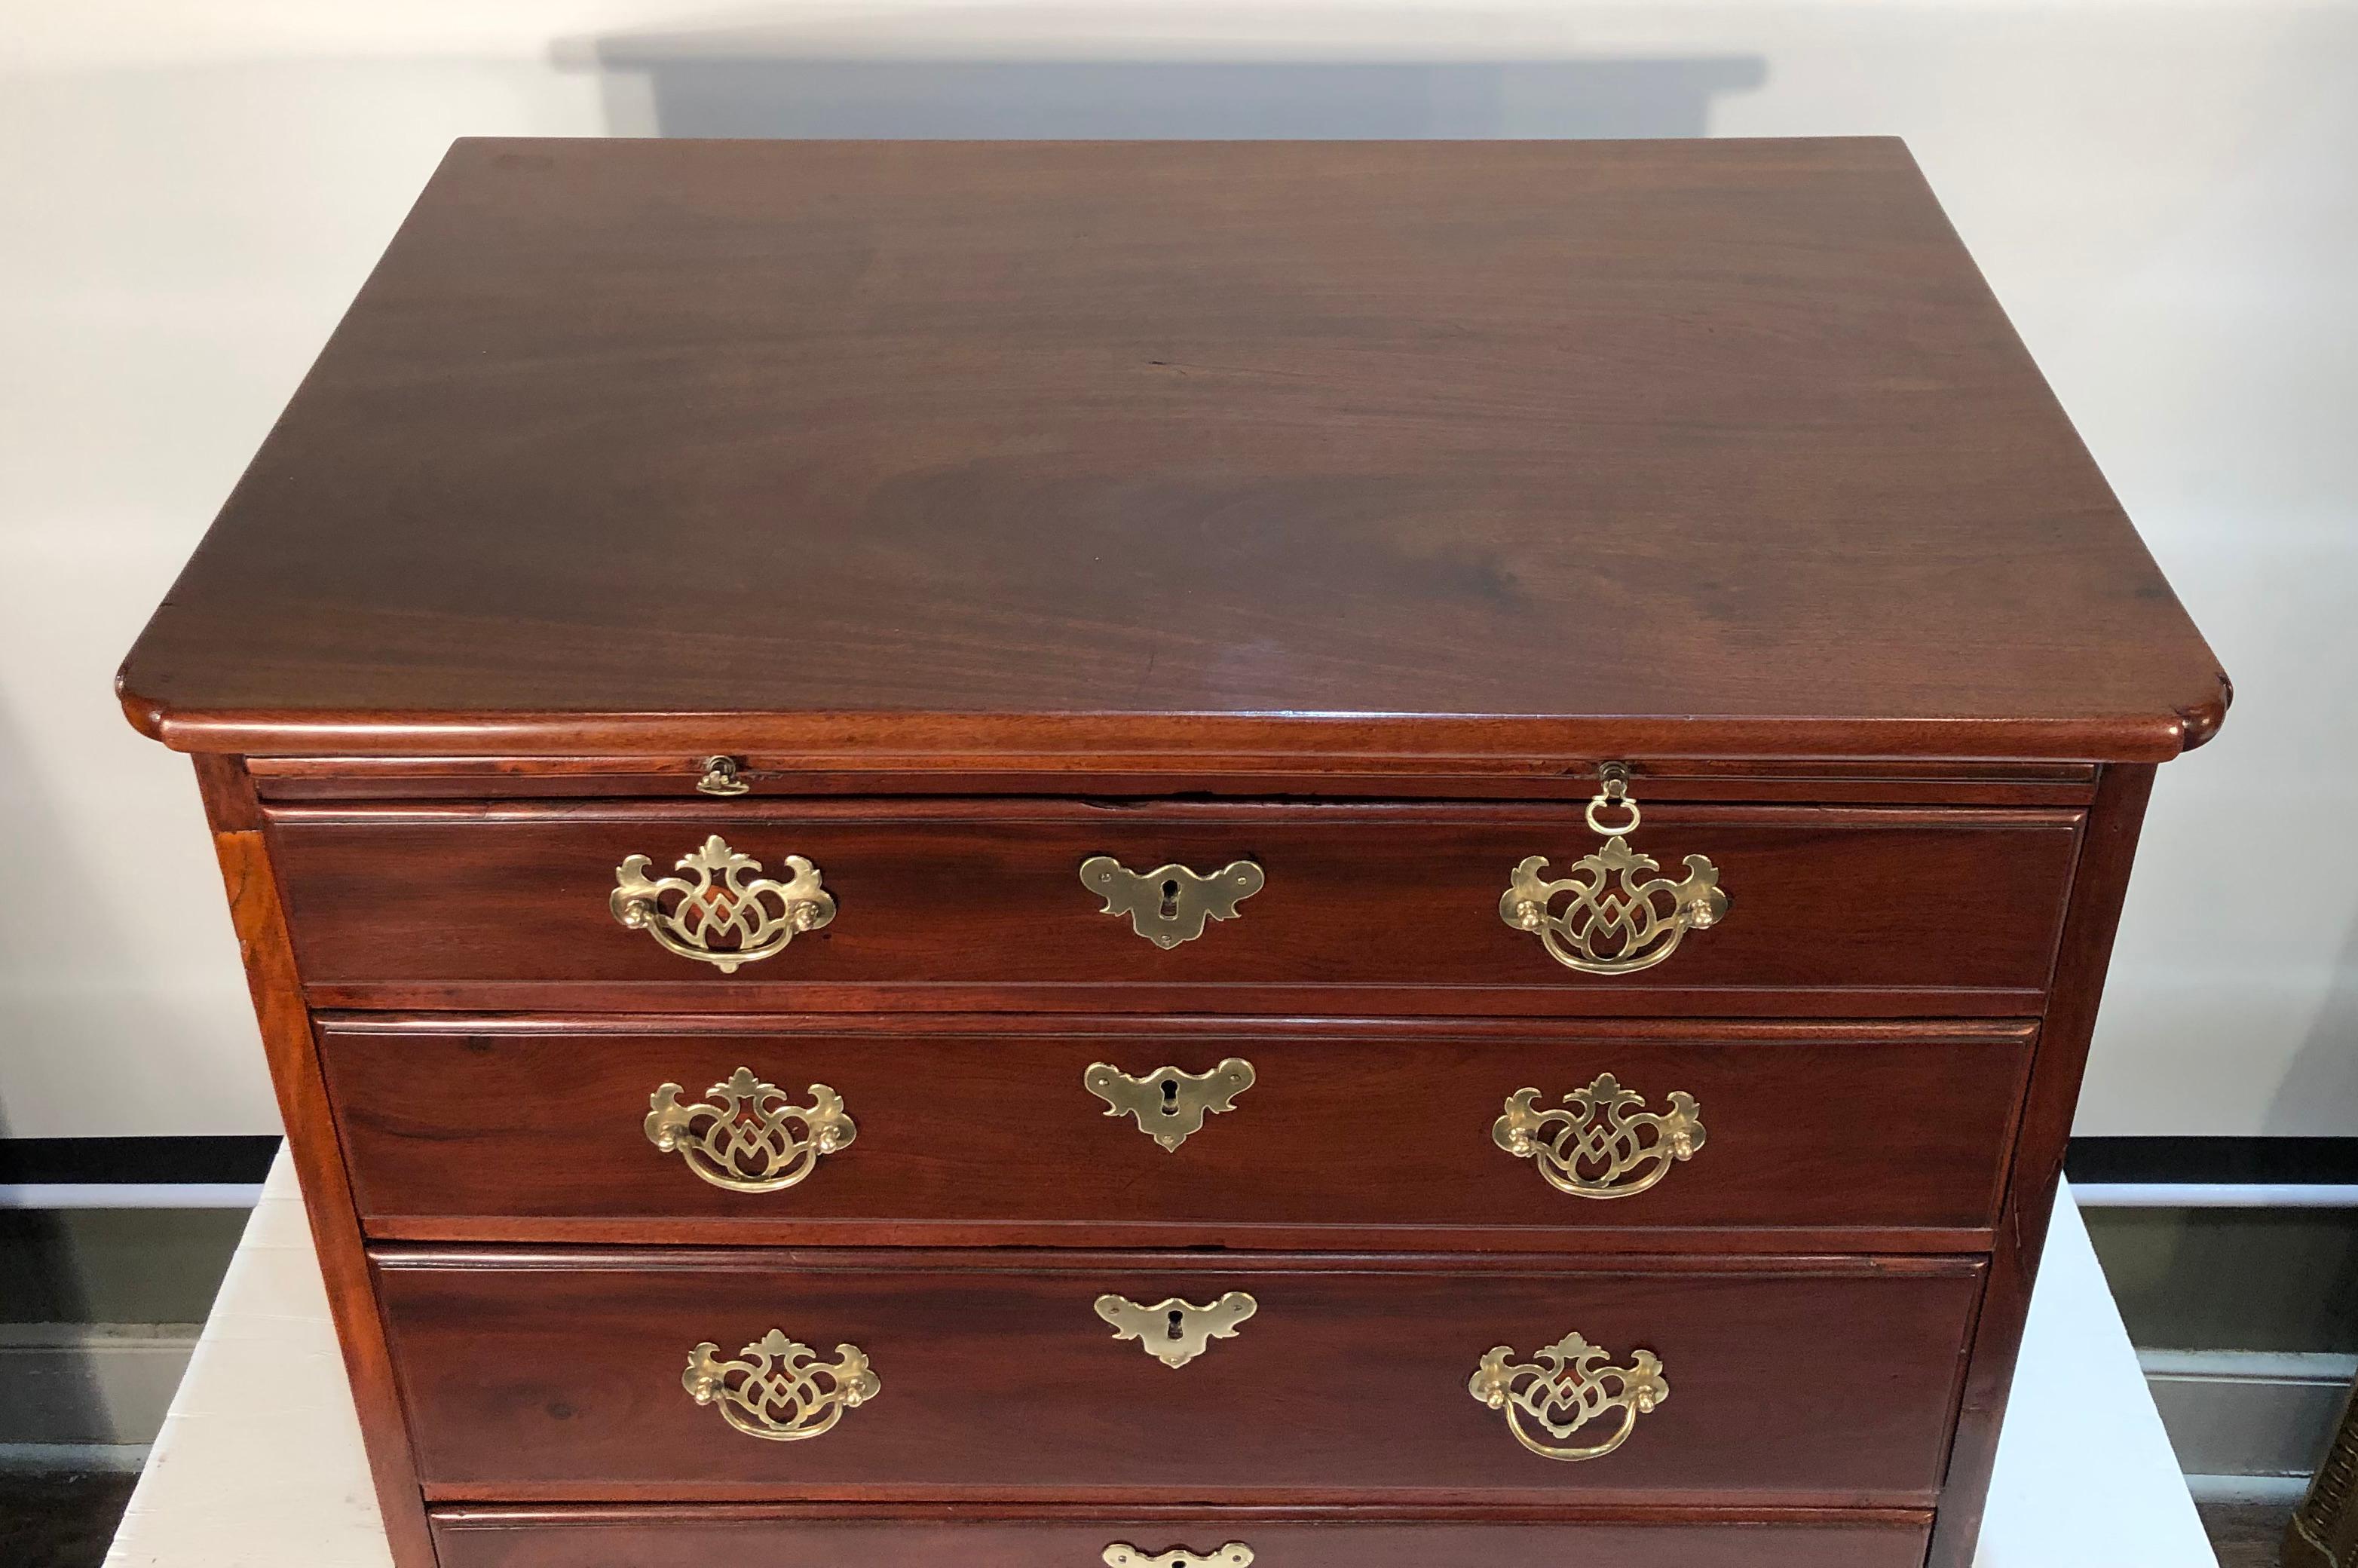 This handsome 18th century solid mahogany English bachelor’s chest has a one board top over the brushing slide. There are 4 graduating drawers ending in original bracket feet. The rich patina and color make this a very beautiful chest. The pulls are